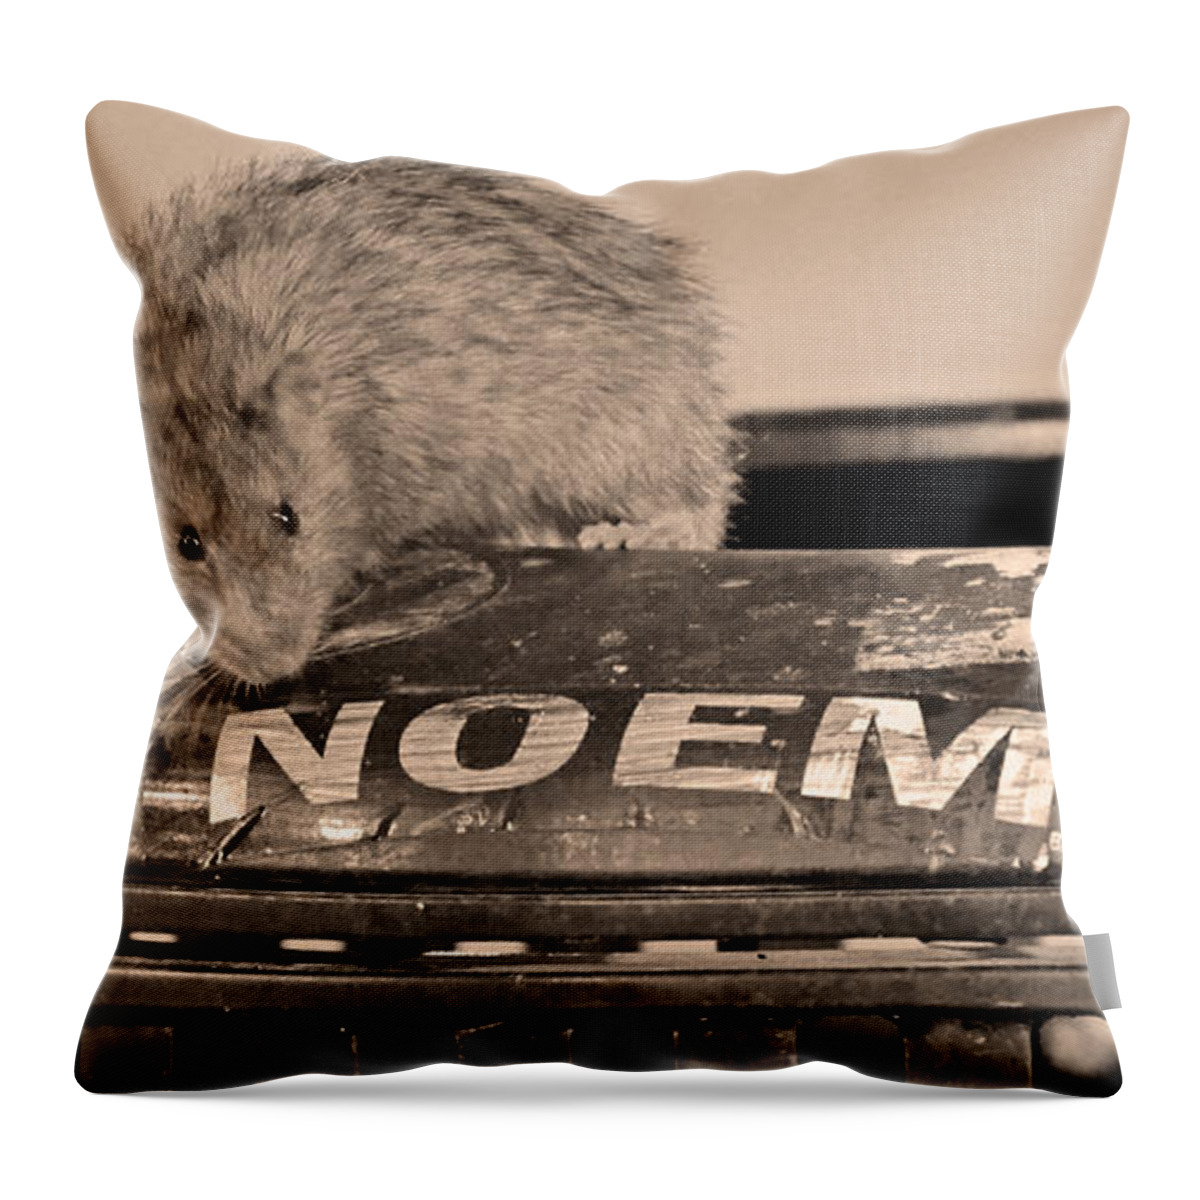 Rat Throw Pillow featuring the photograph Baltimore Rat by La Dolce Vita